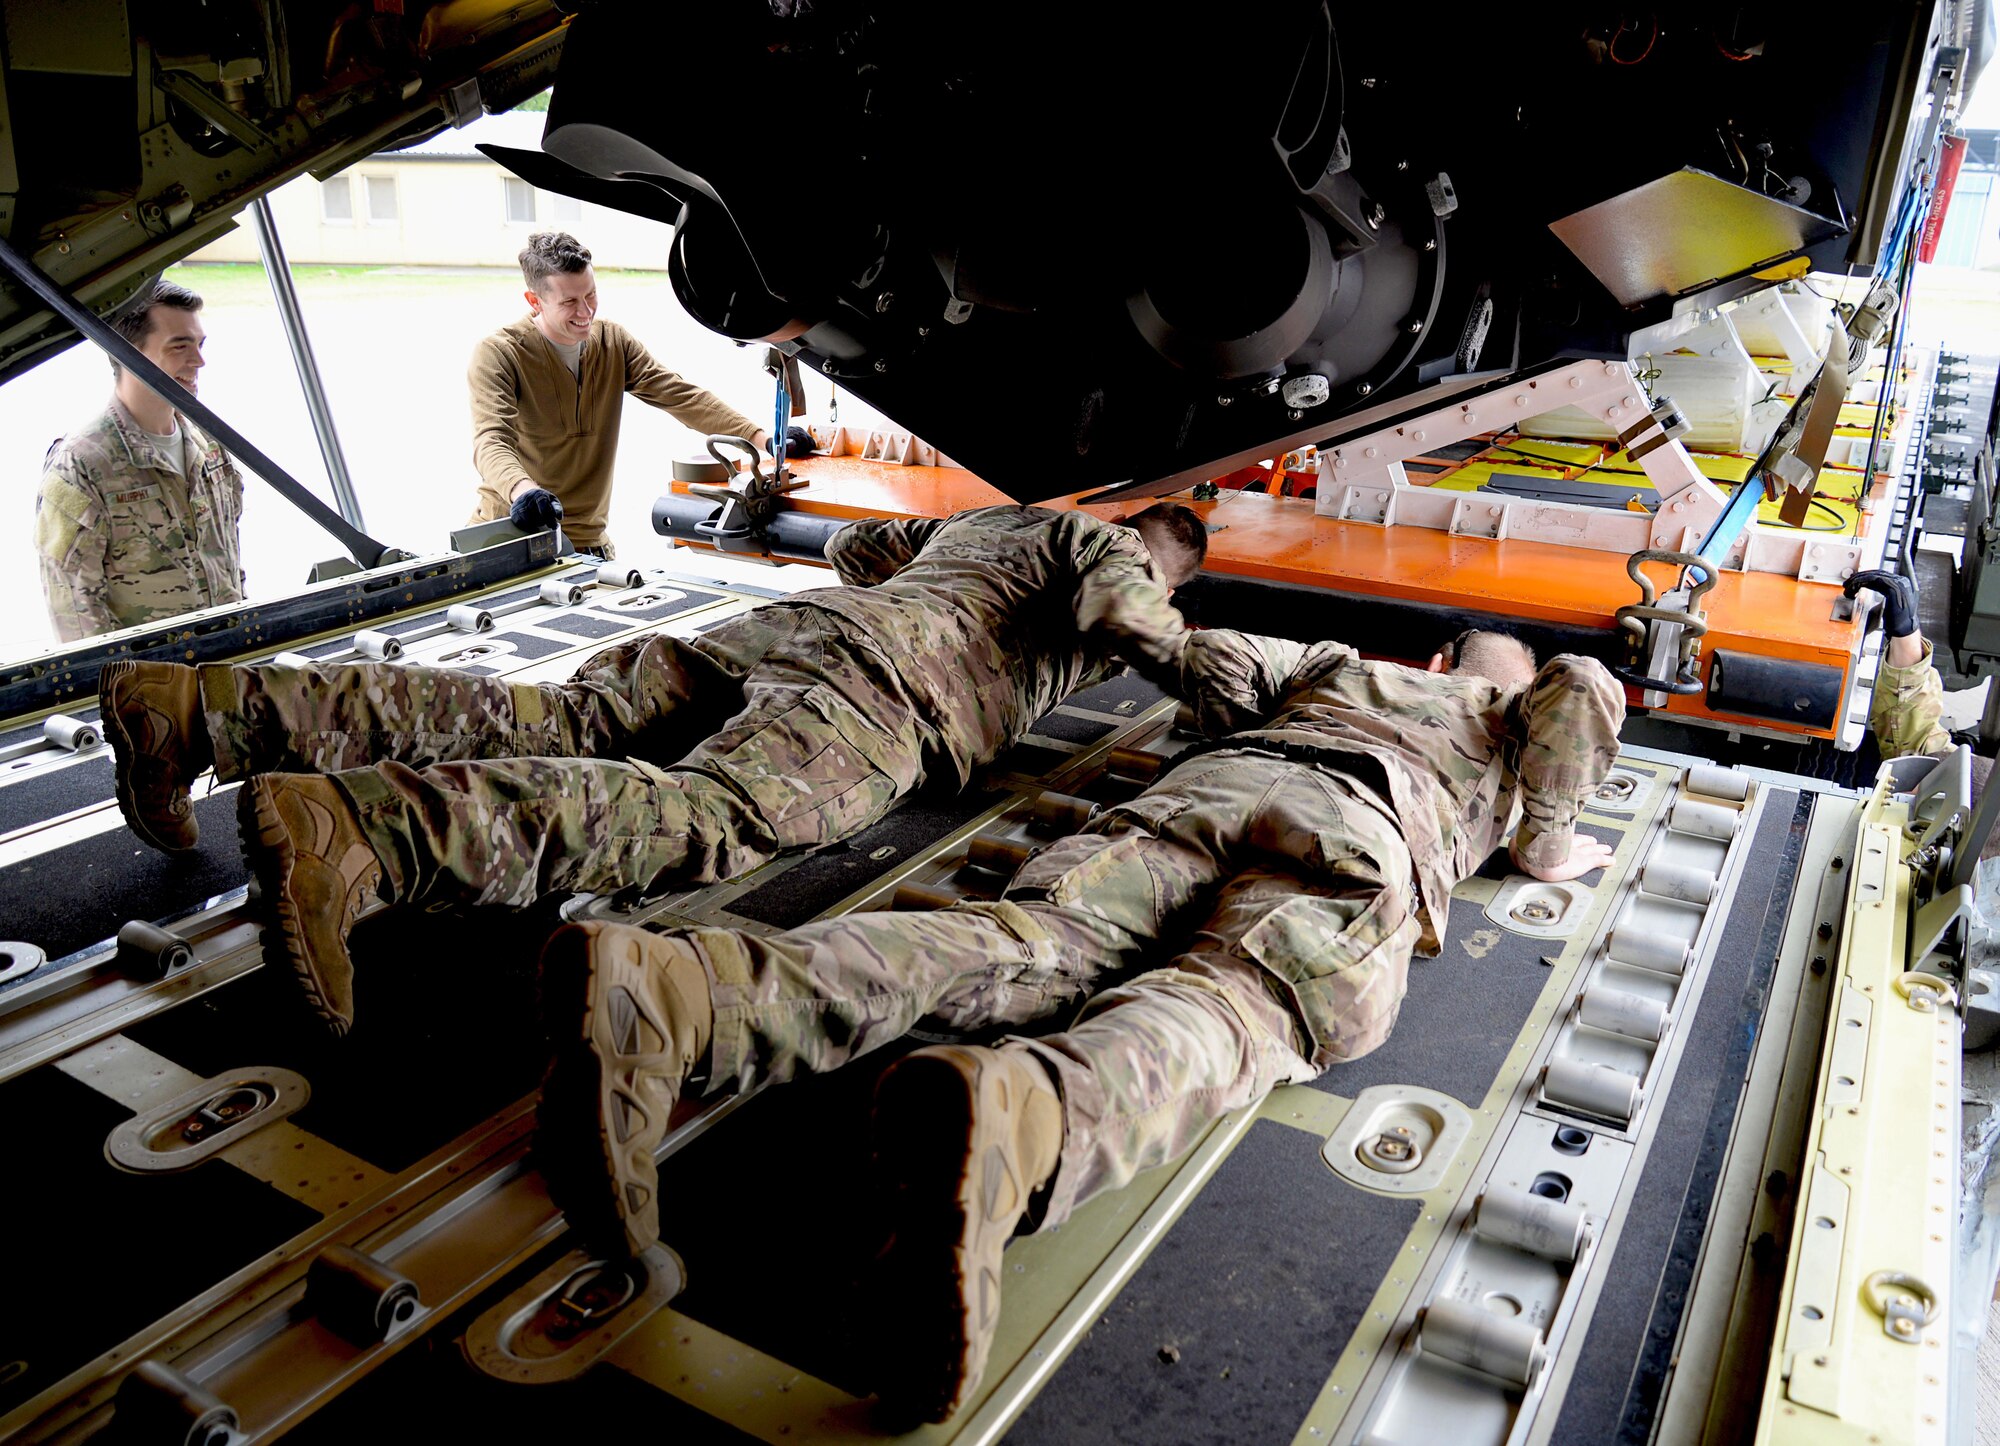 Loadmasters from the 67th Special Operations Squadron double check alignment while loading a Rigid Inflatable Boat onto an MC-130J Commando II in preparation for a Maritime Craft Aerial Delivery drop Sept. 26, 2016, at Stuttgart Air Base, Germany. The MCADS is the only airdrop system currently capable of deploying RIBs. The RIB is loaded onto the aircraft on a platform that must be carefully aligned due to the sheer size of the cargo. (U.S. Air Force photo by Senior Airman Justine Rho)